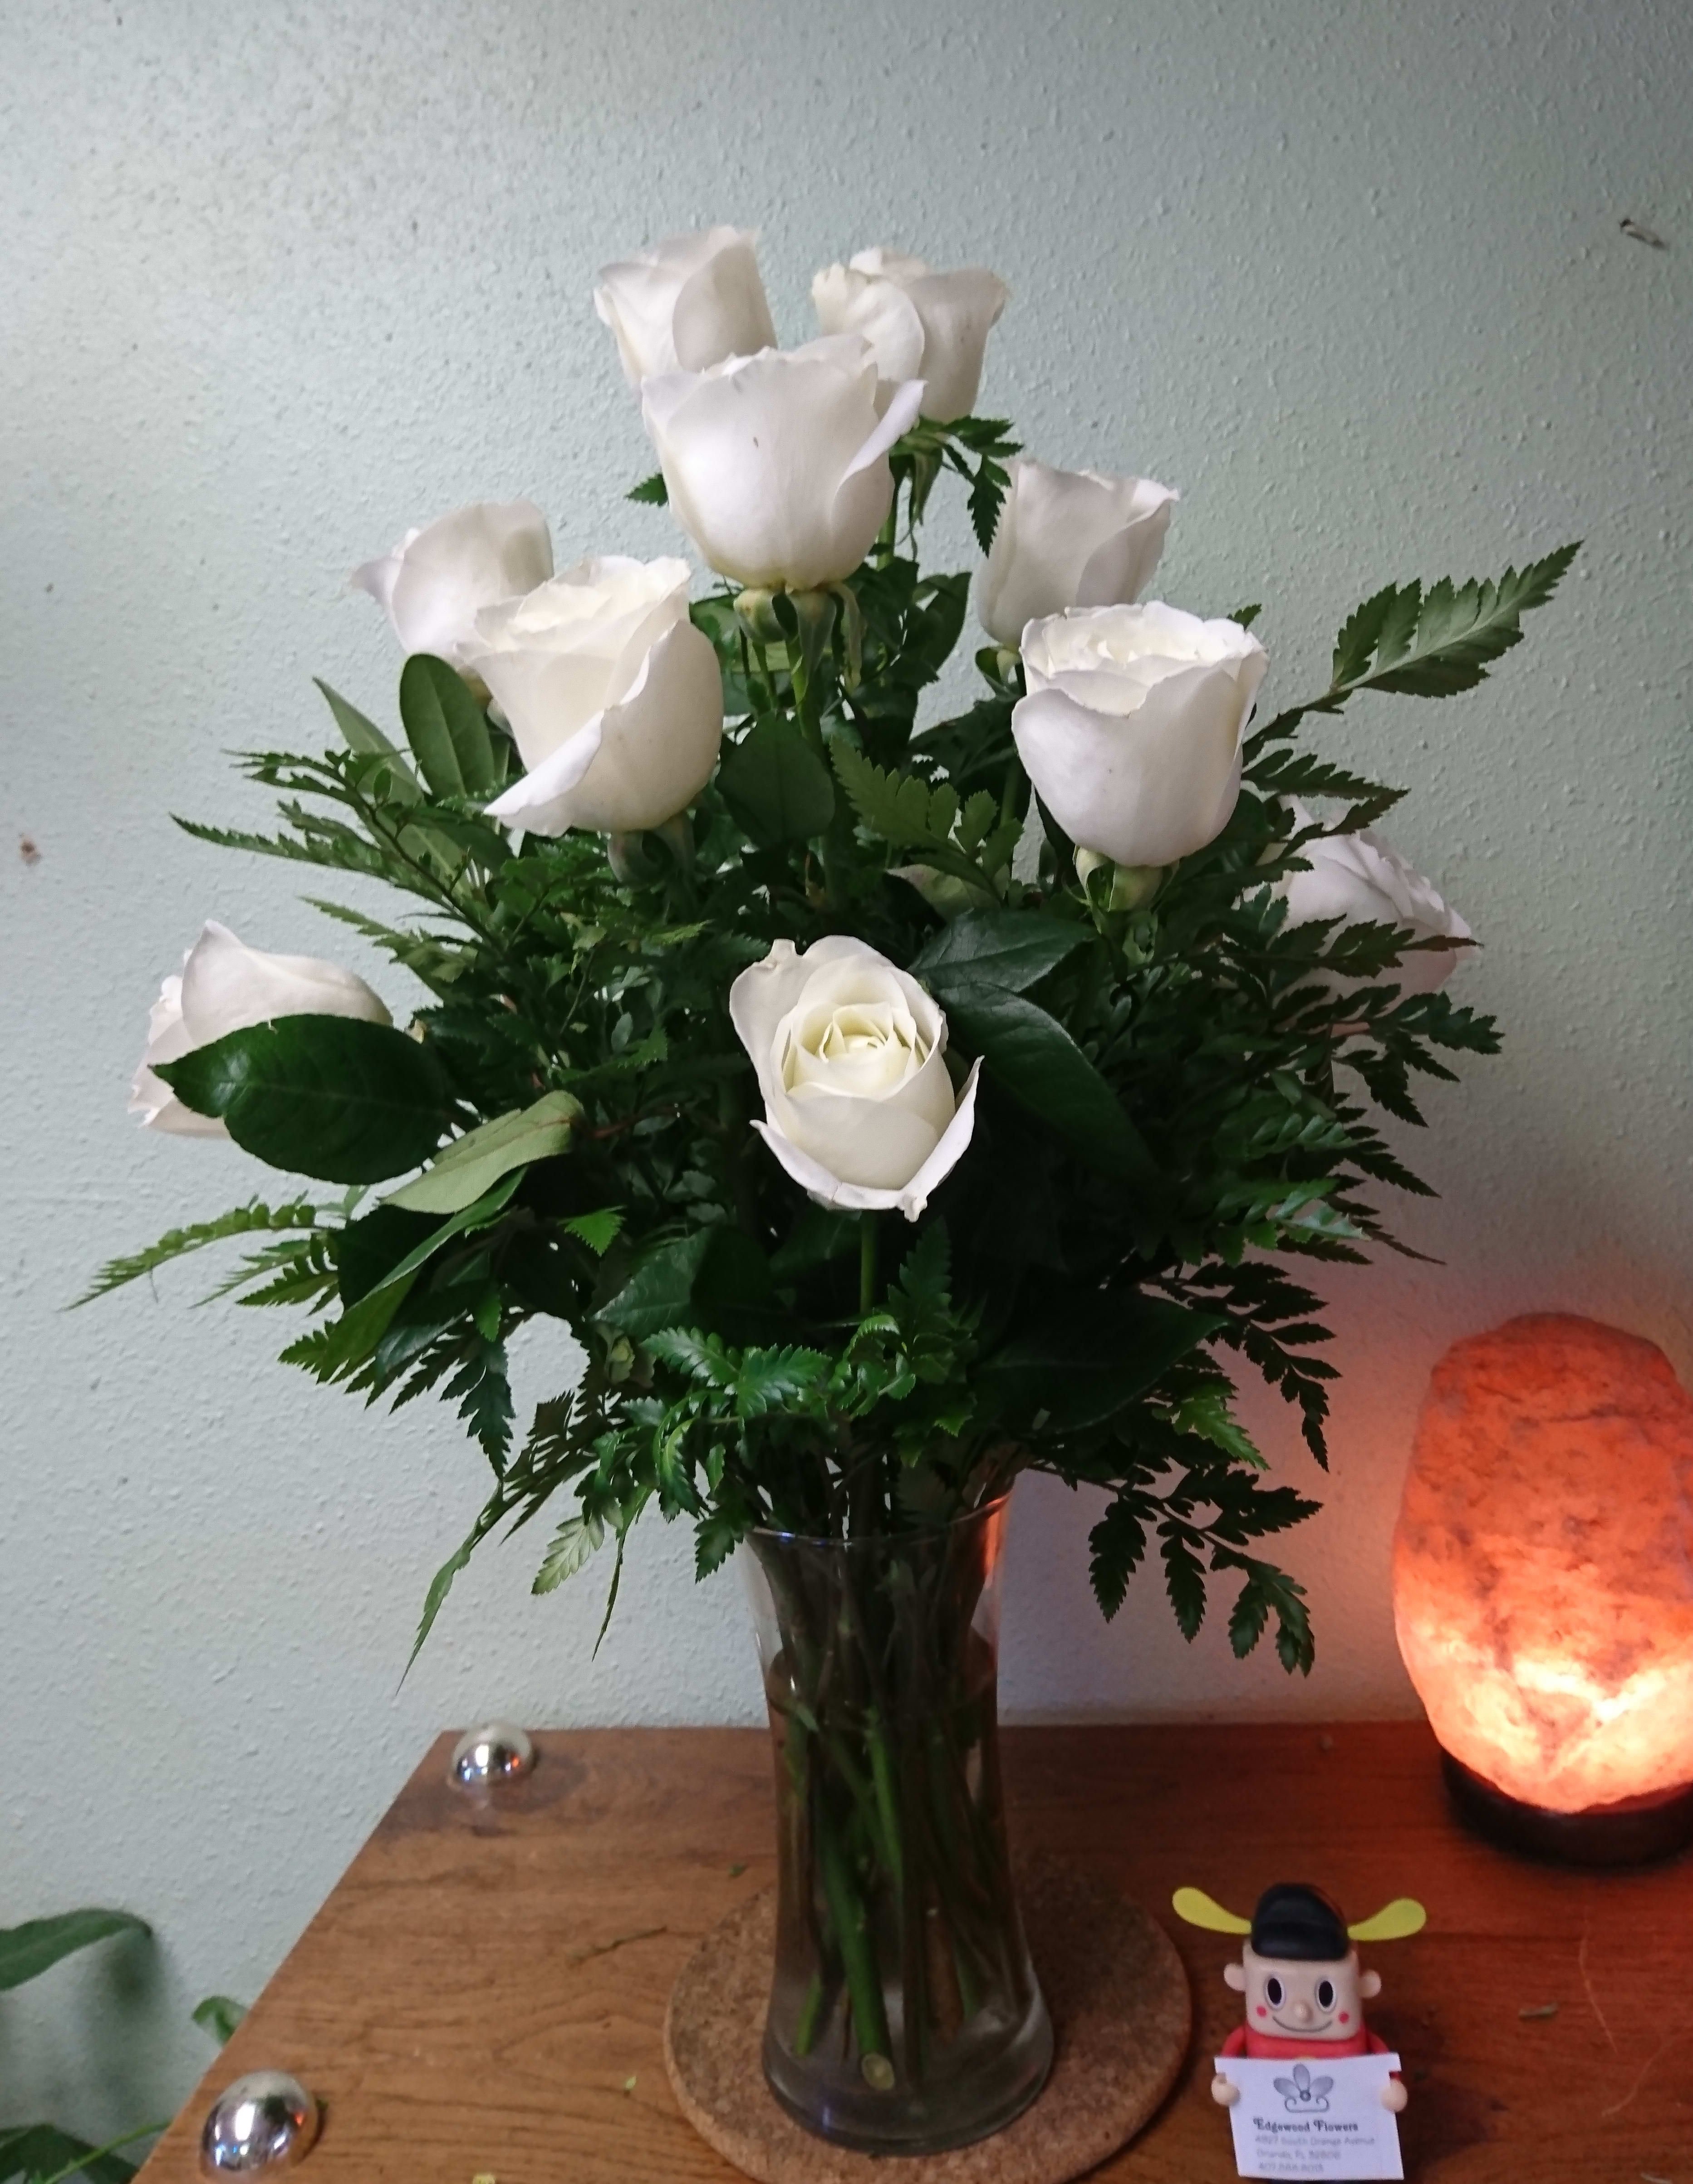 The White Rose Bouquet - The White Rose Bouquet offers a rare beauty of simple elegance that will bring peace and comfort to your special recipient during their time of grief and loss. A bouquet of white roses arrives accented by lush greens gorgeously arranged in a clear glass vase to create a graceful way to display your most sincere sympathies.